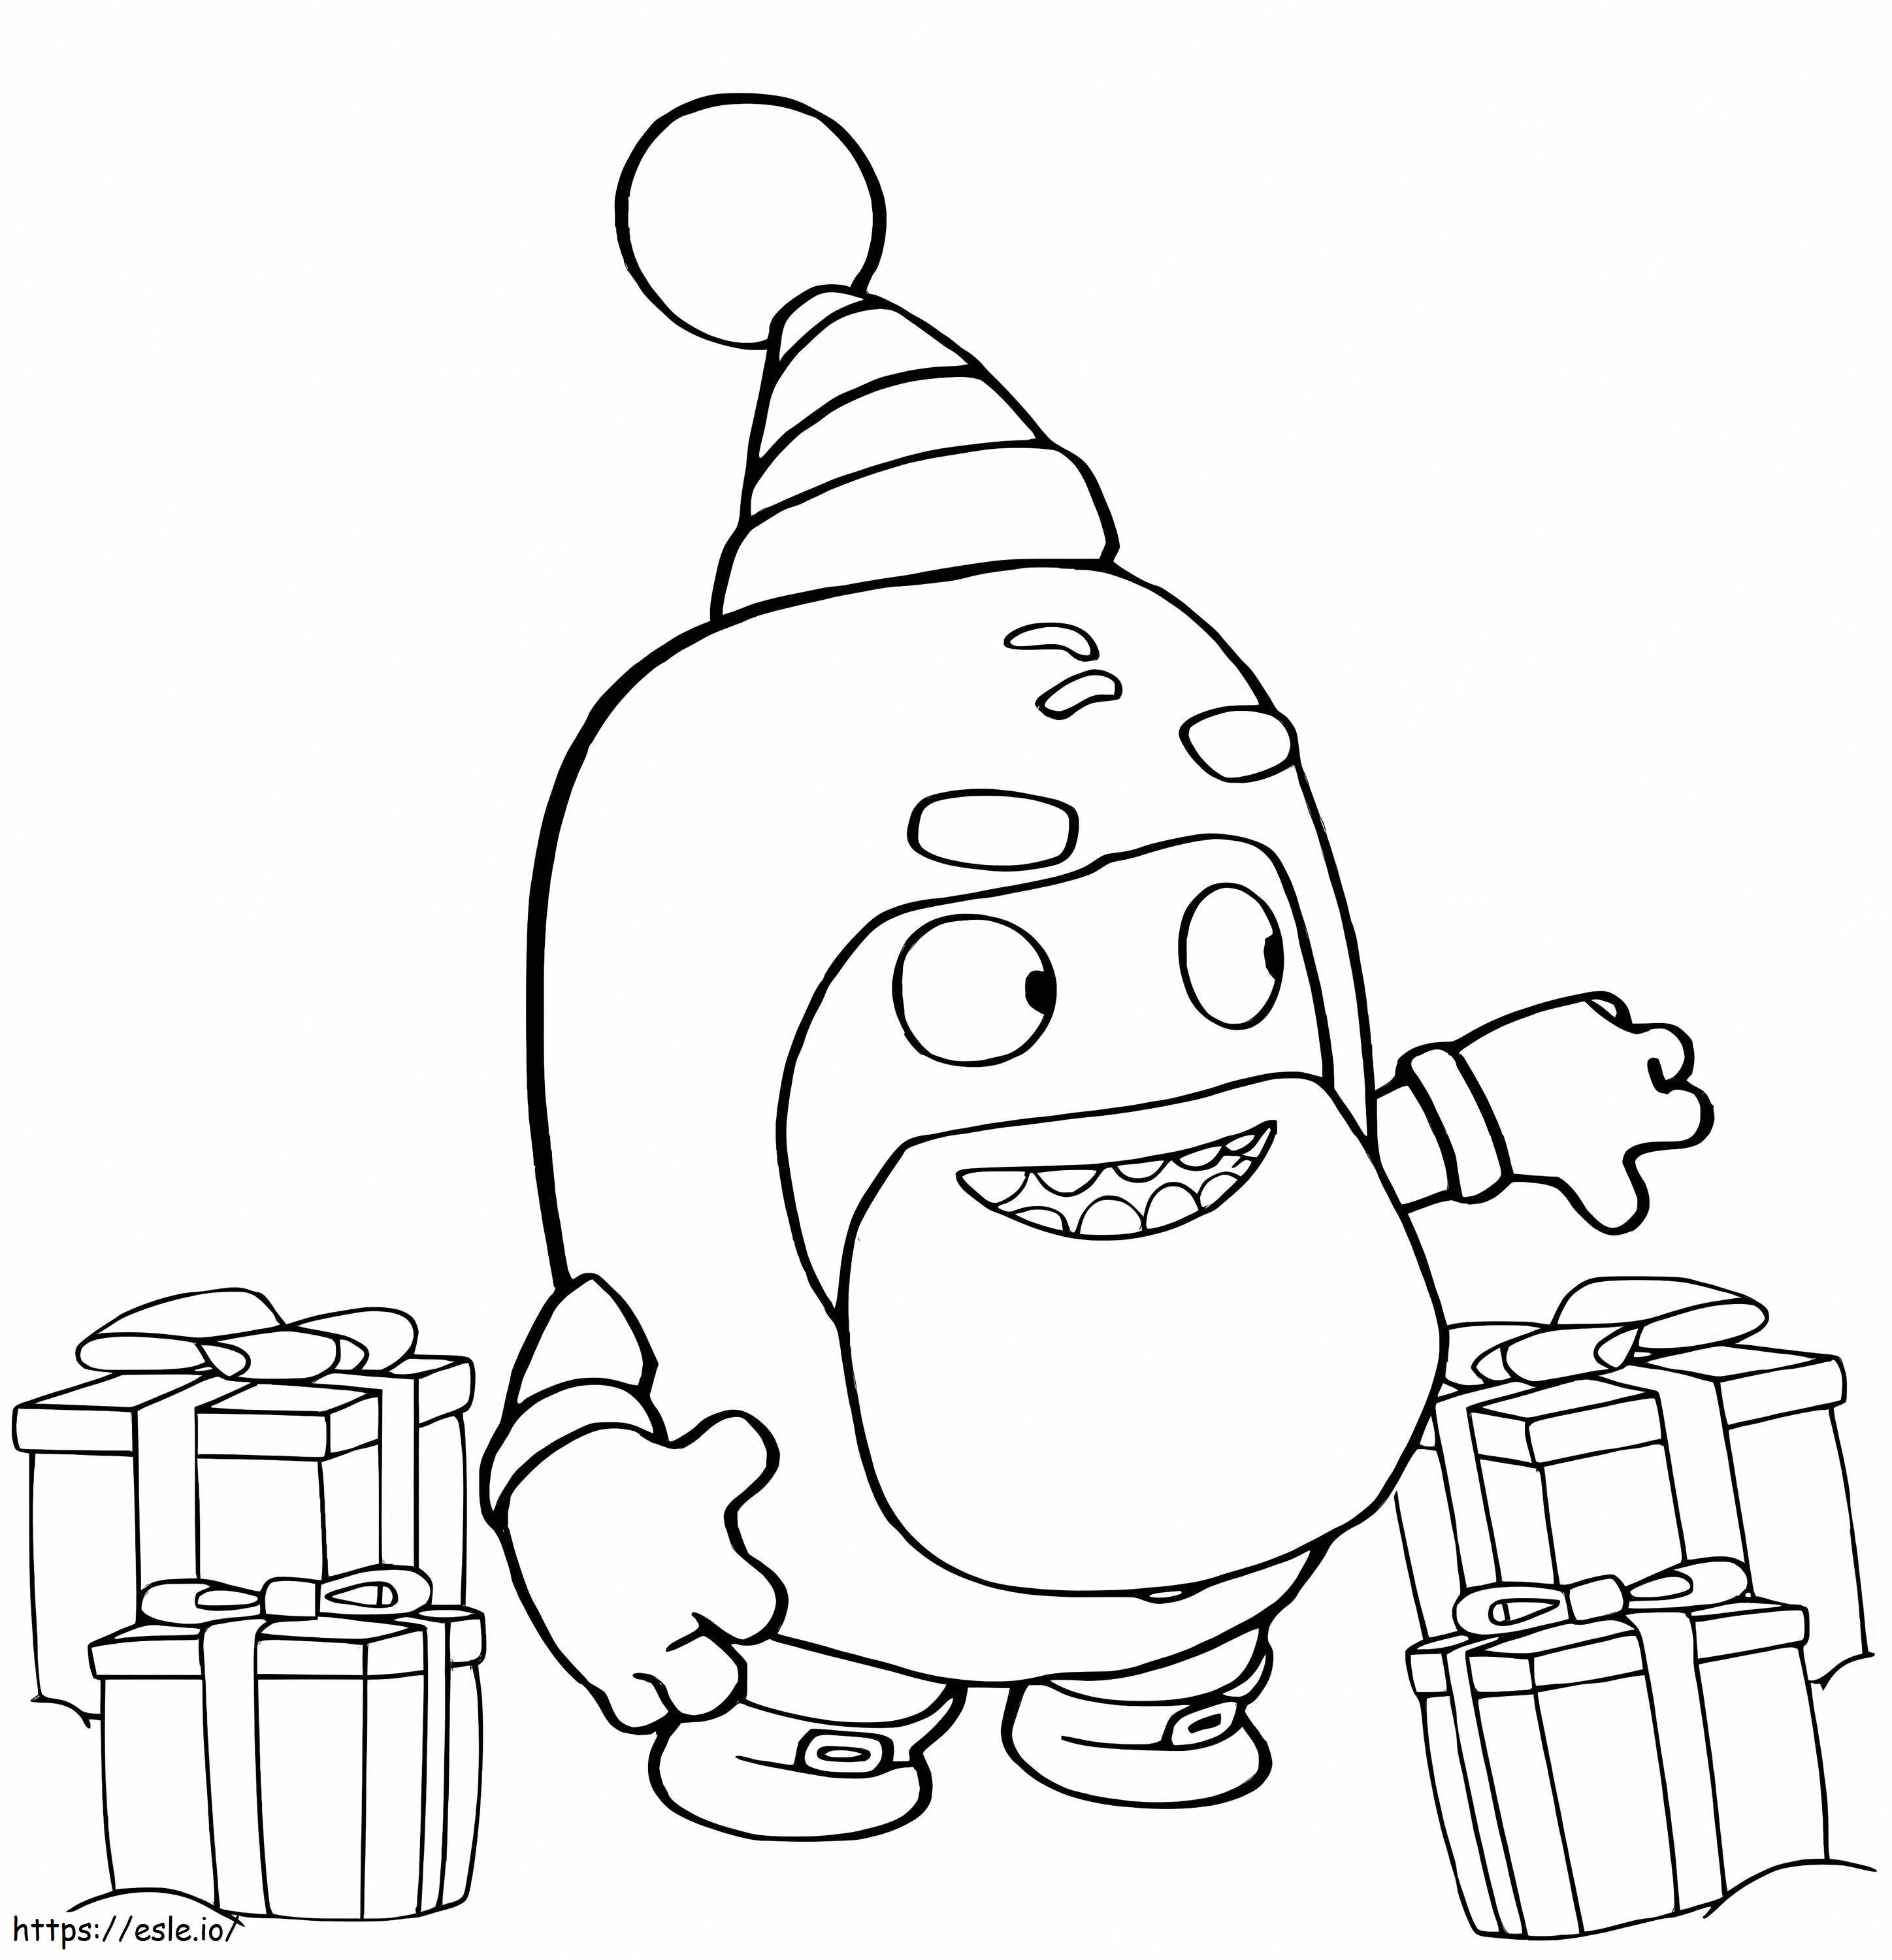 Oddbods Santa Claus With Gifts coloring page